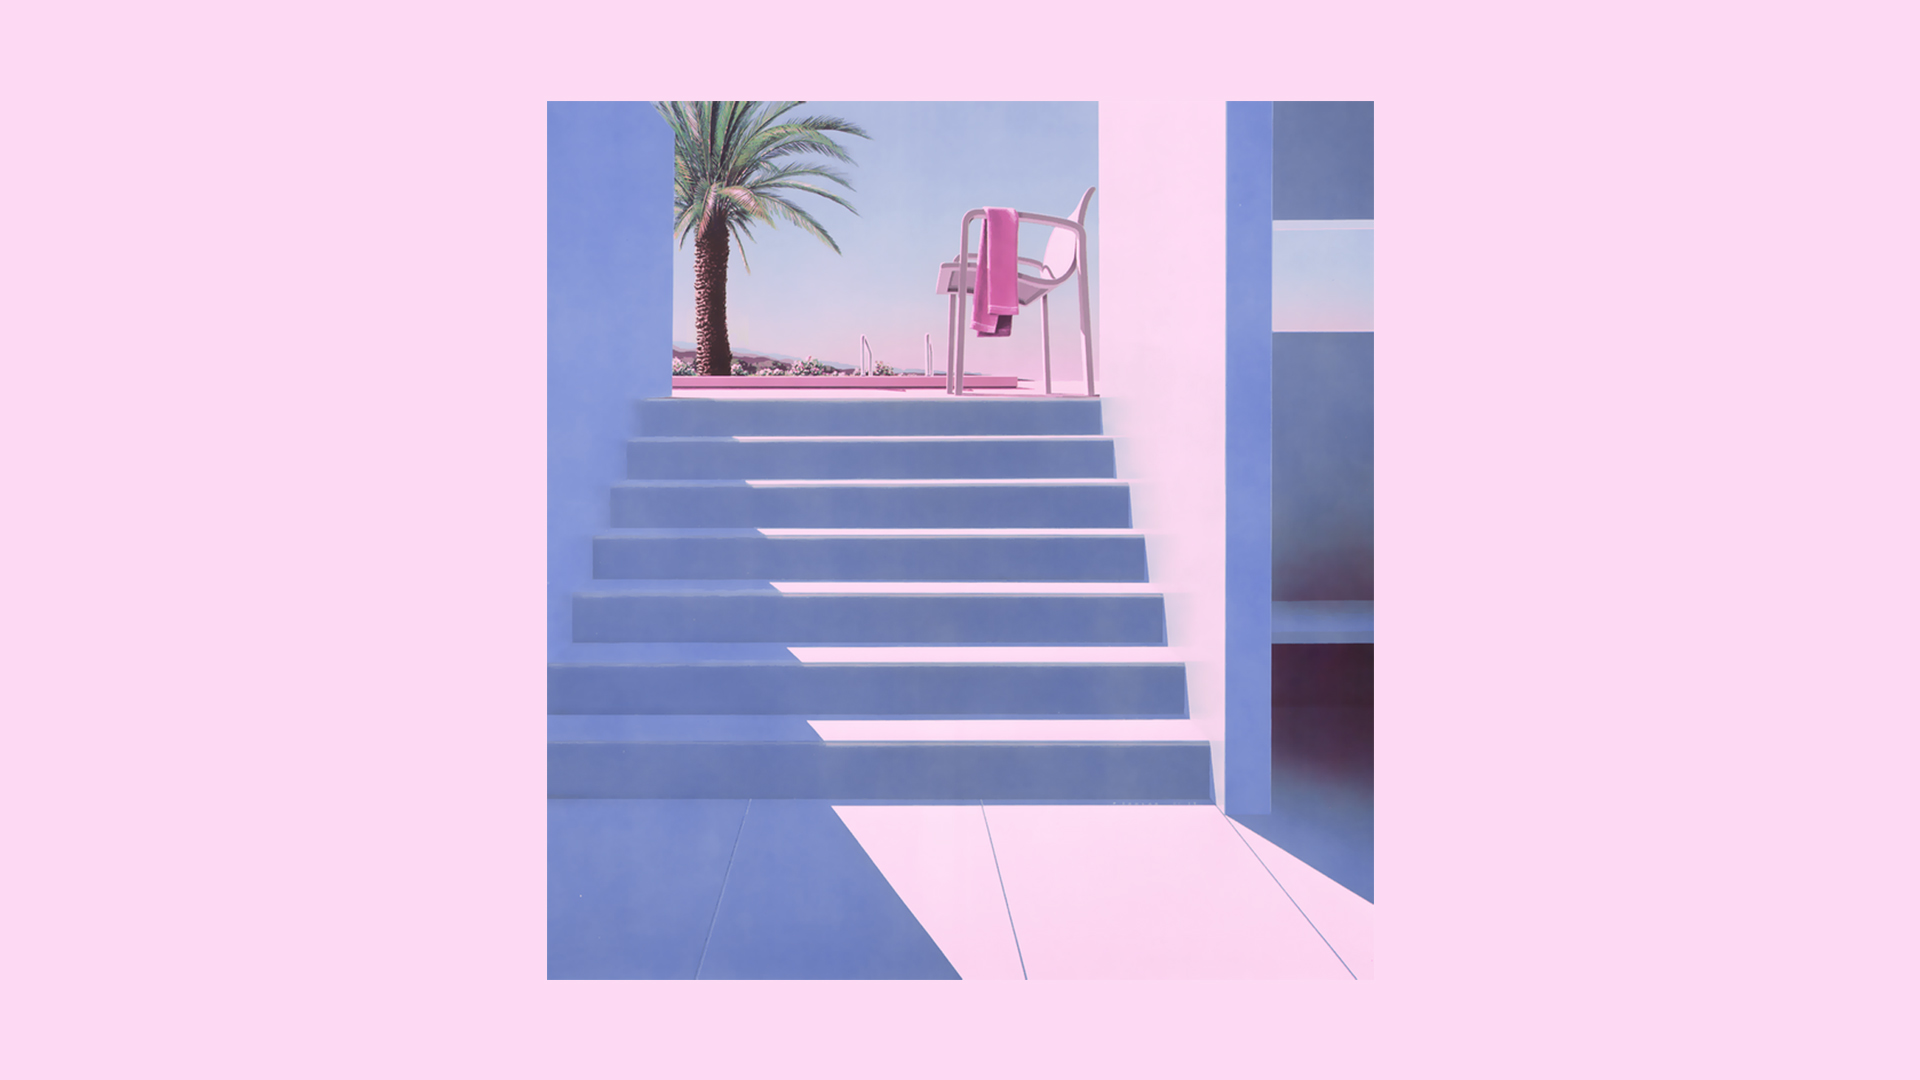 General 1920x1080 retrowave vaporwave 1980s pink palm trees stairs chair